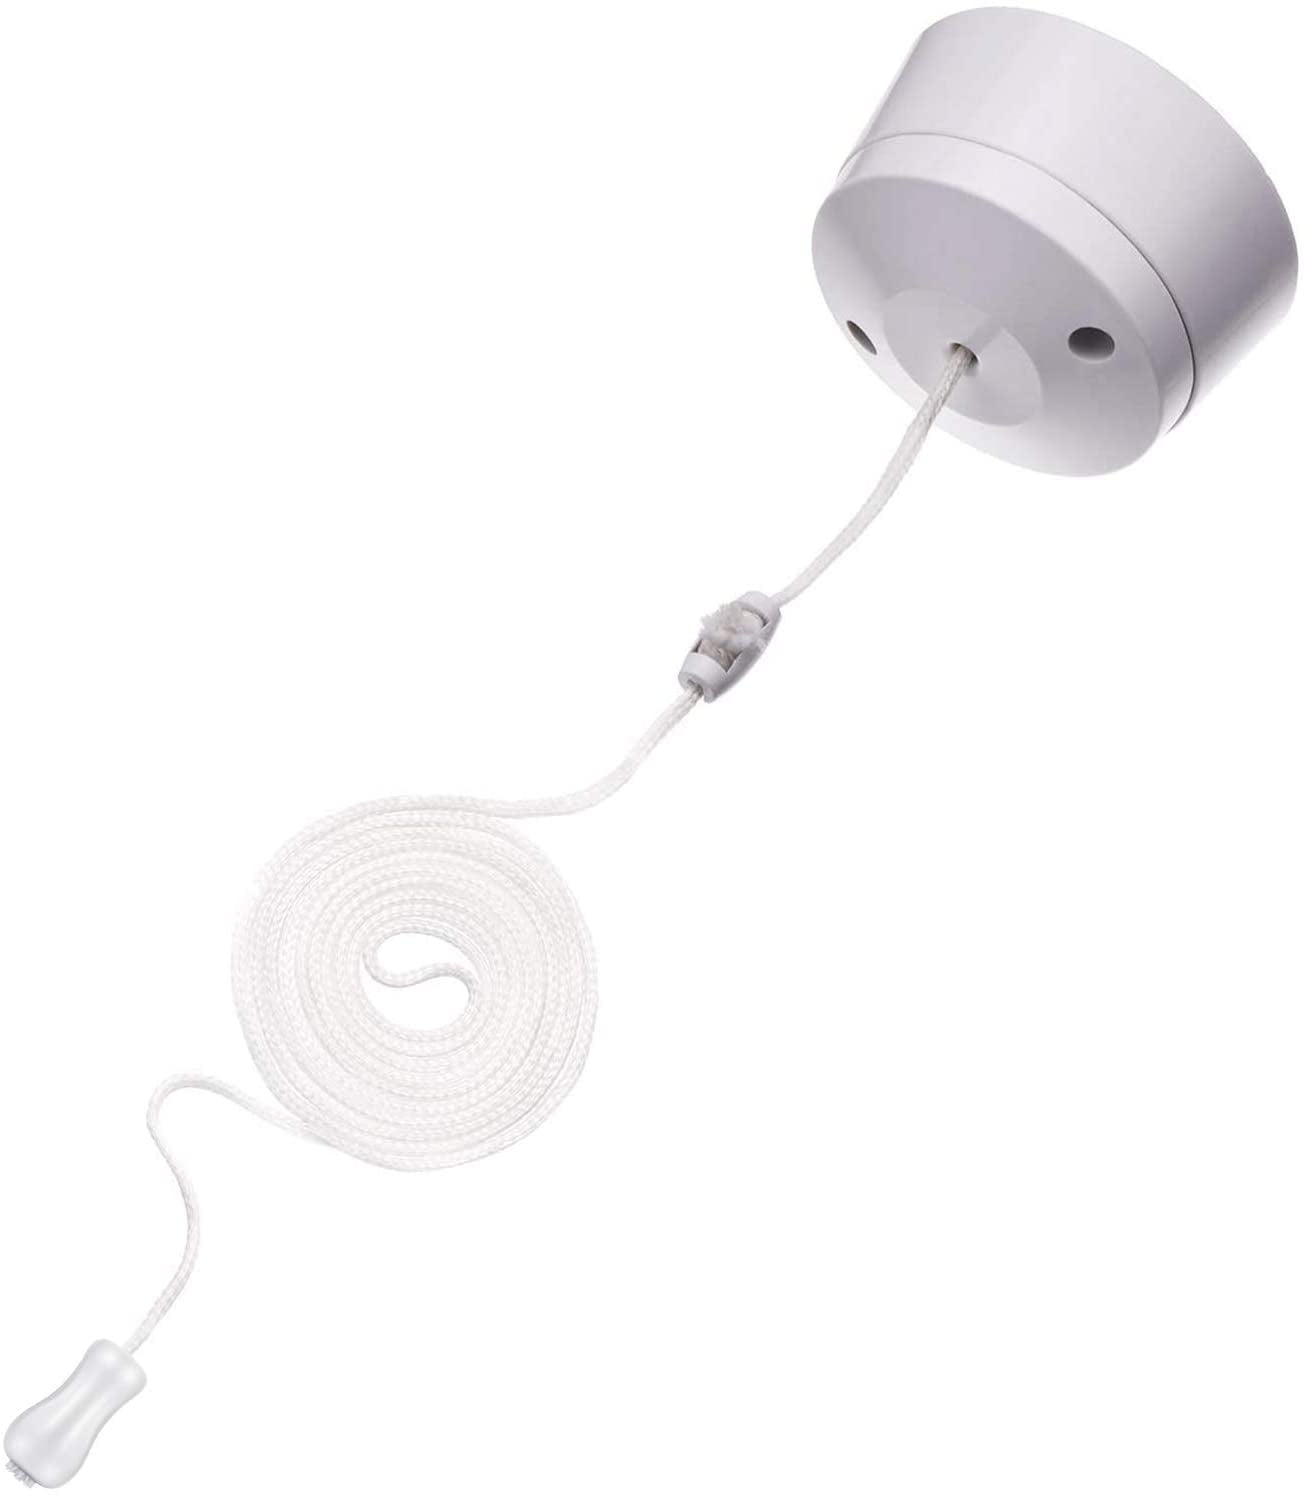 Drops Pull End for Blinds or Shades 10 PCS White Cord Plastic Tassel 